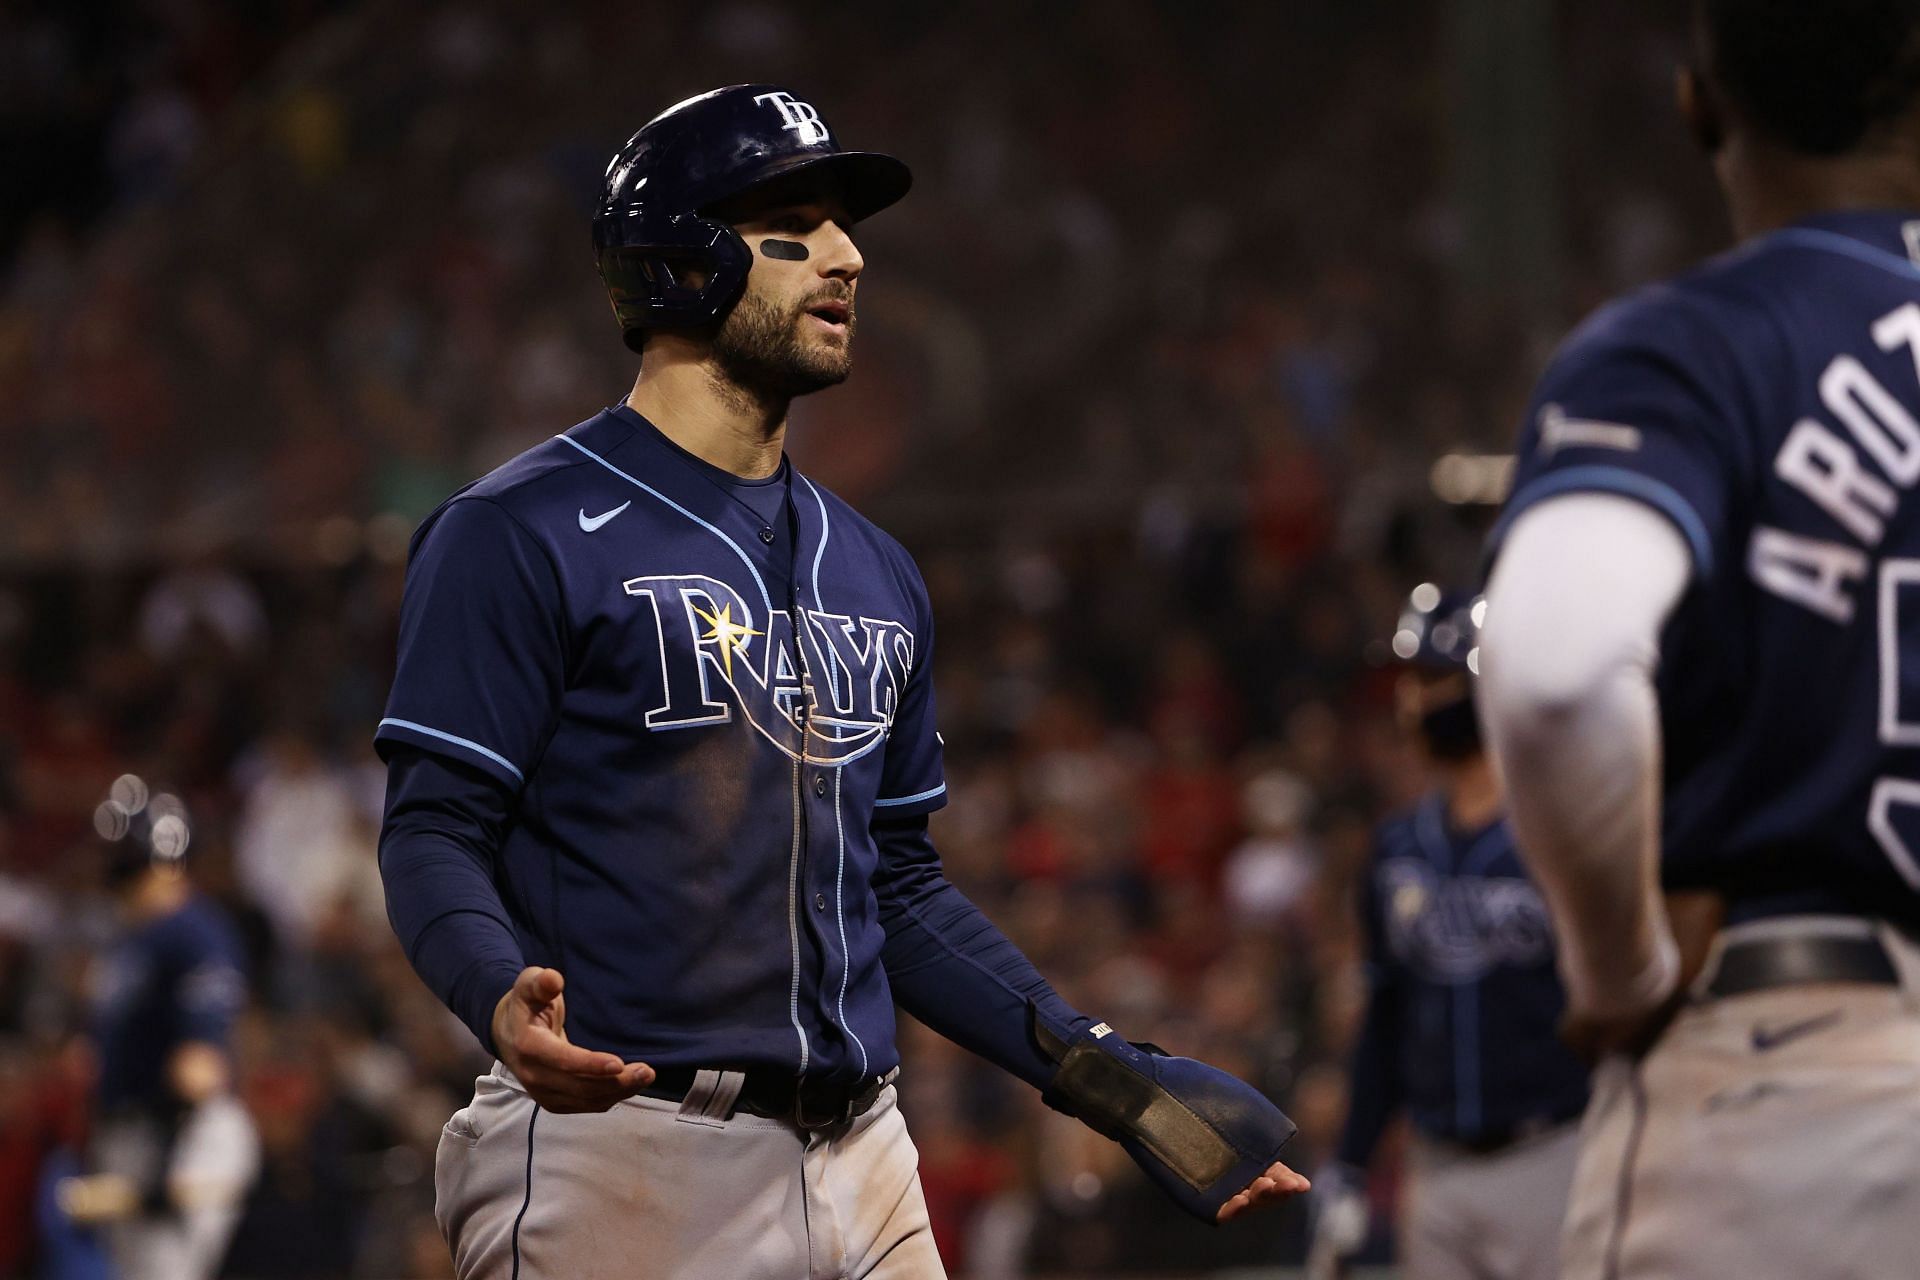 Kevin Kiermaier and Bo Bichette were asked by MLB who do they